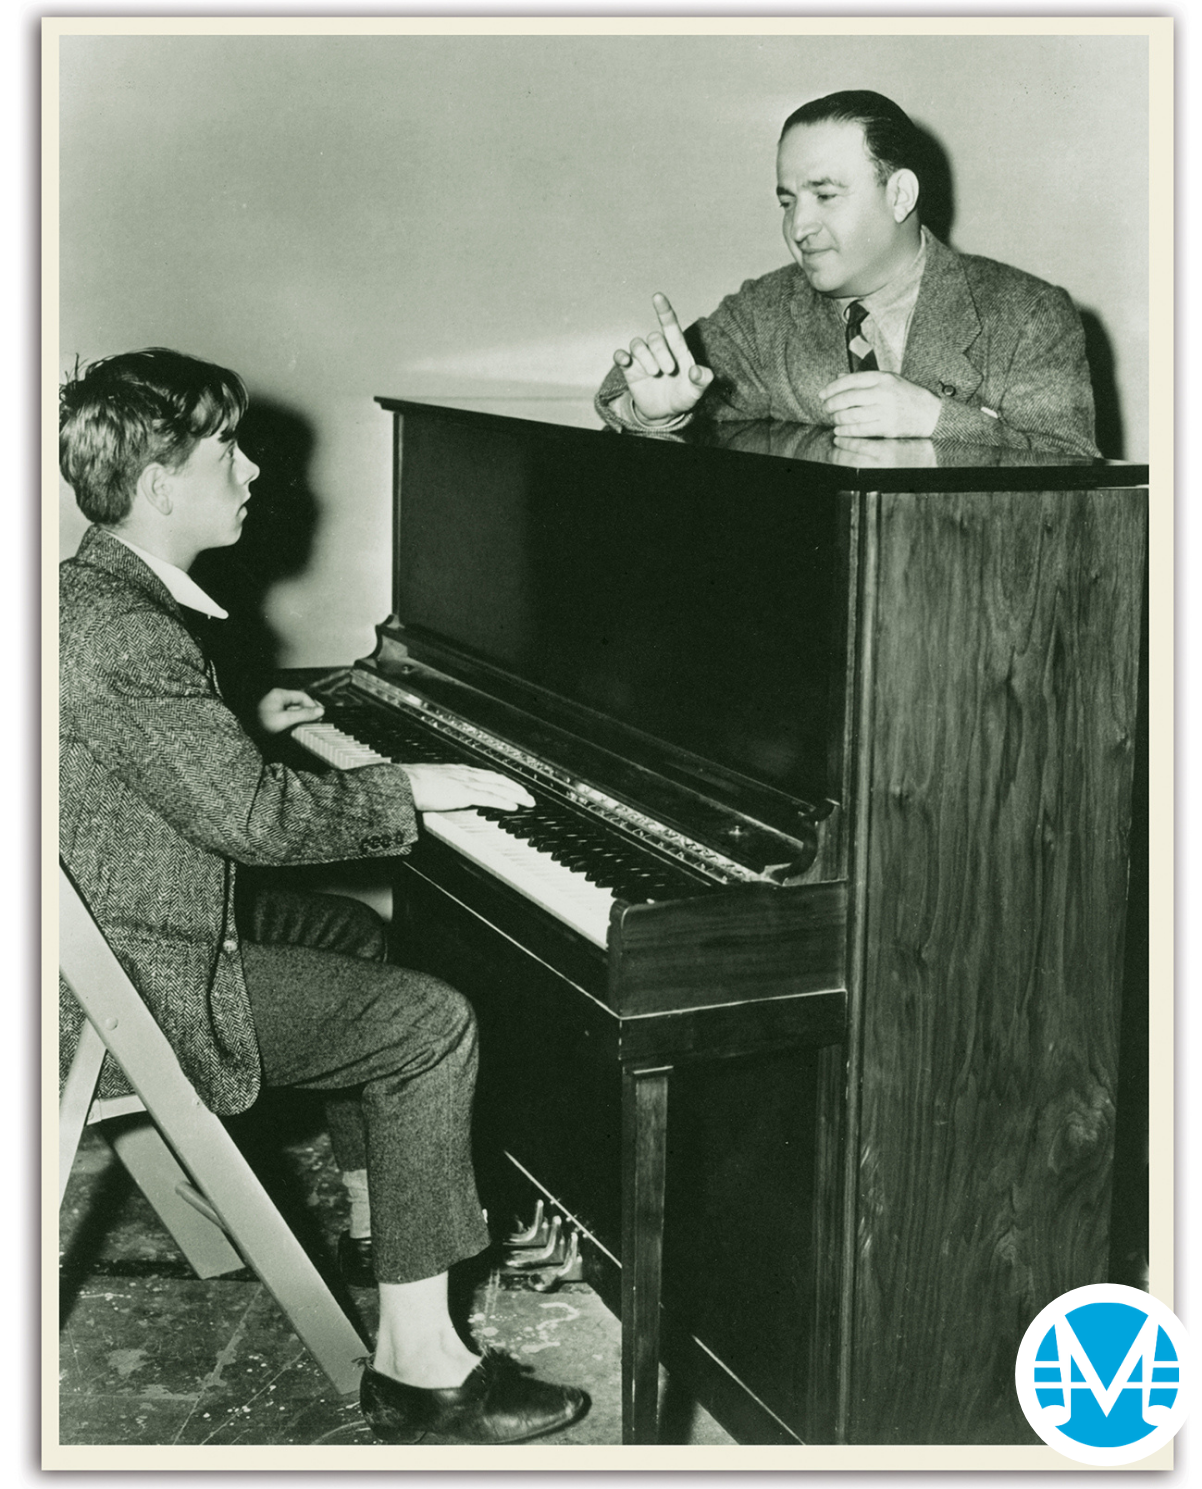 Gus Kahn instructs a young Mickey Rooney to play piano.